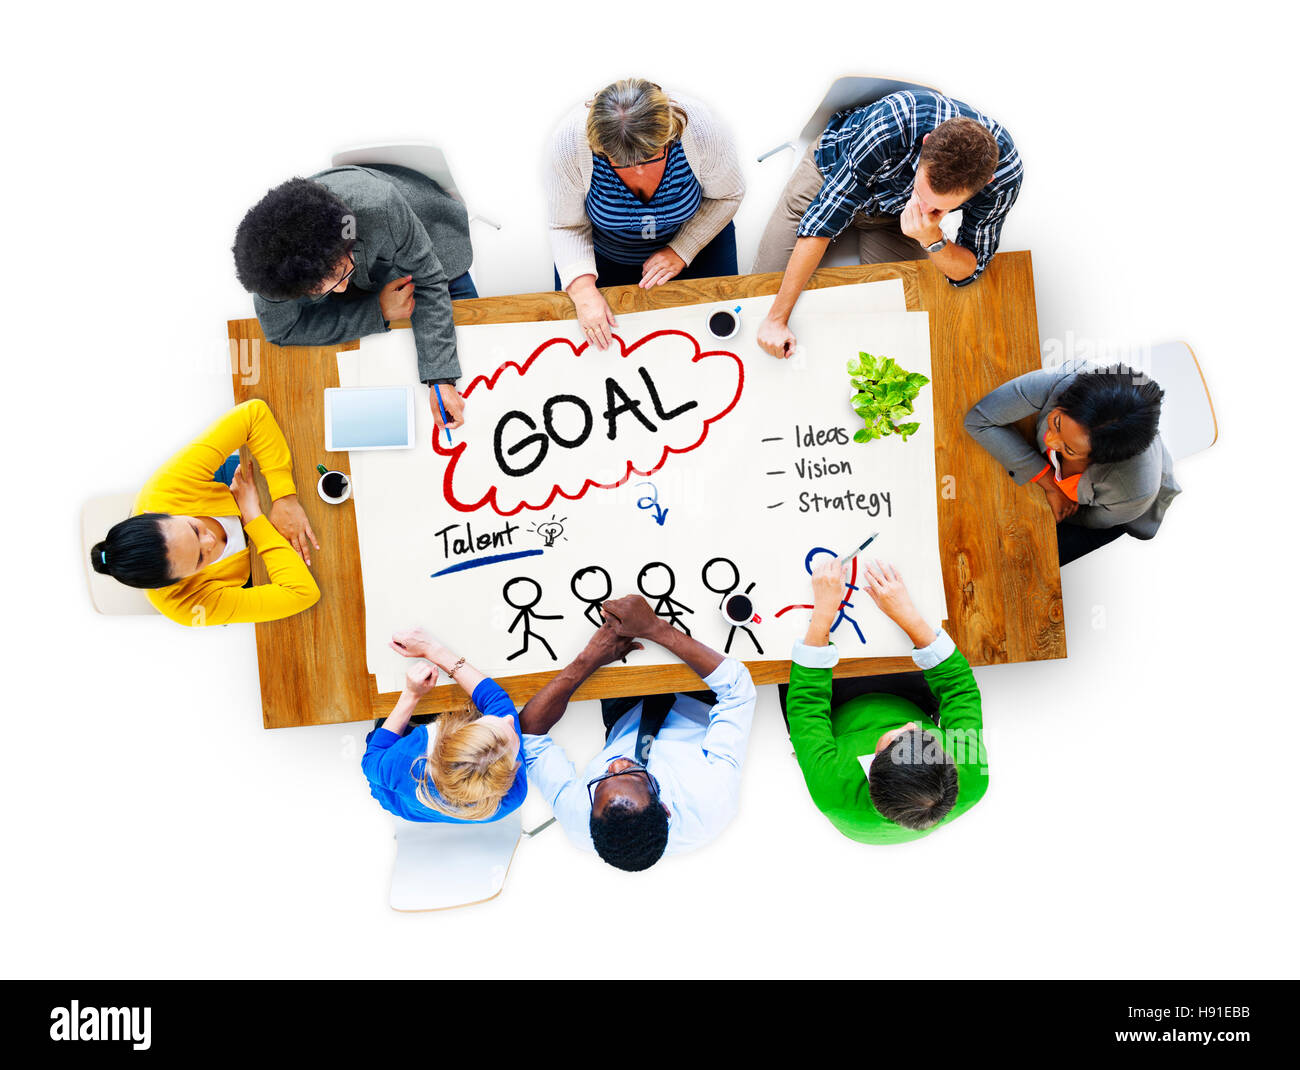 Goal Expectation Target Mission Aim Concept Stock Photo